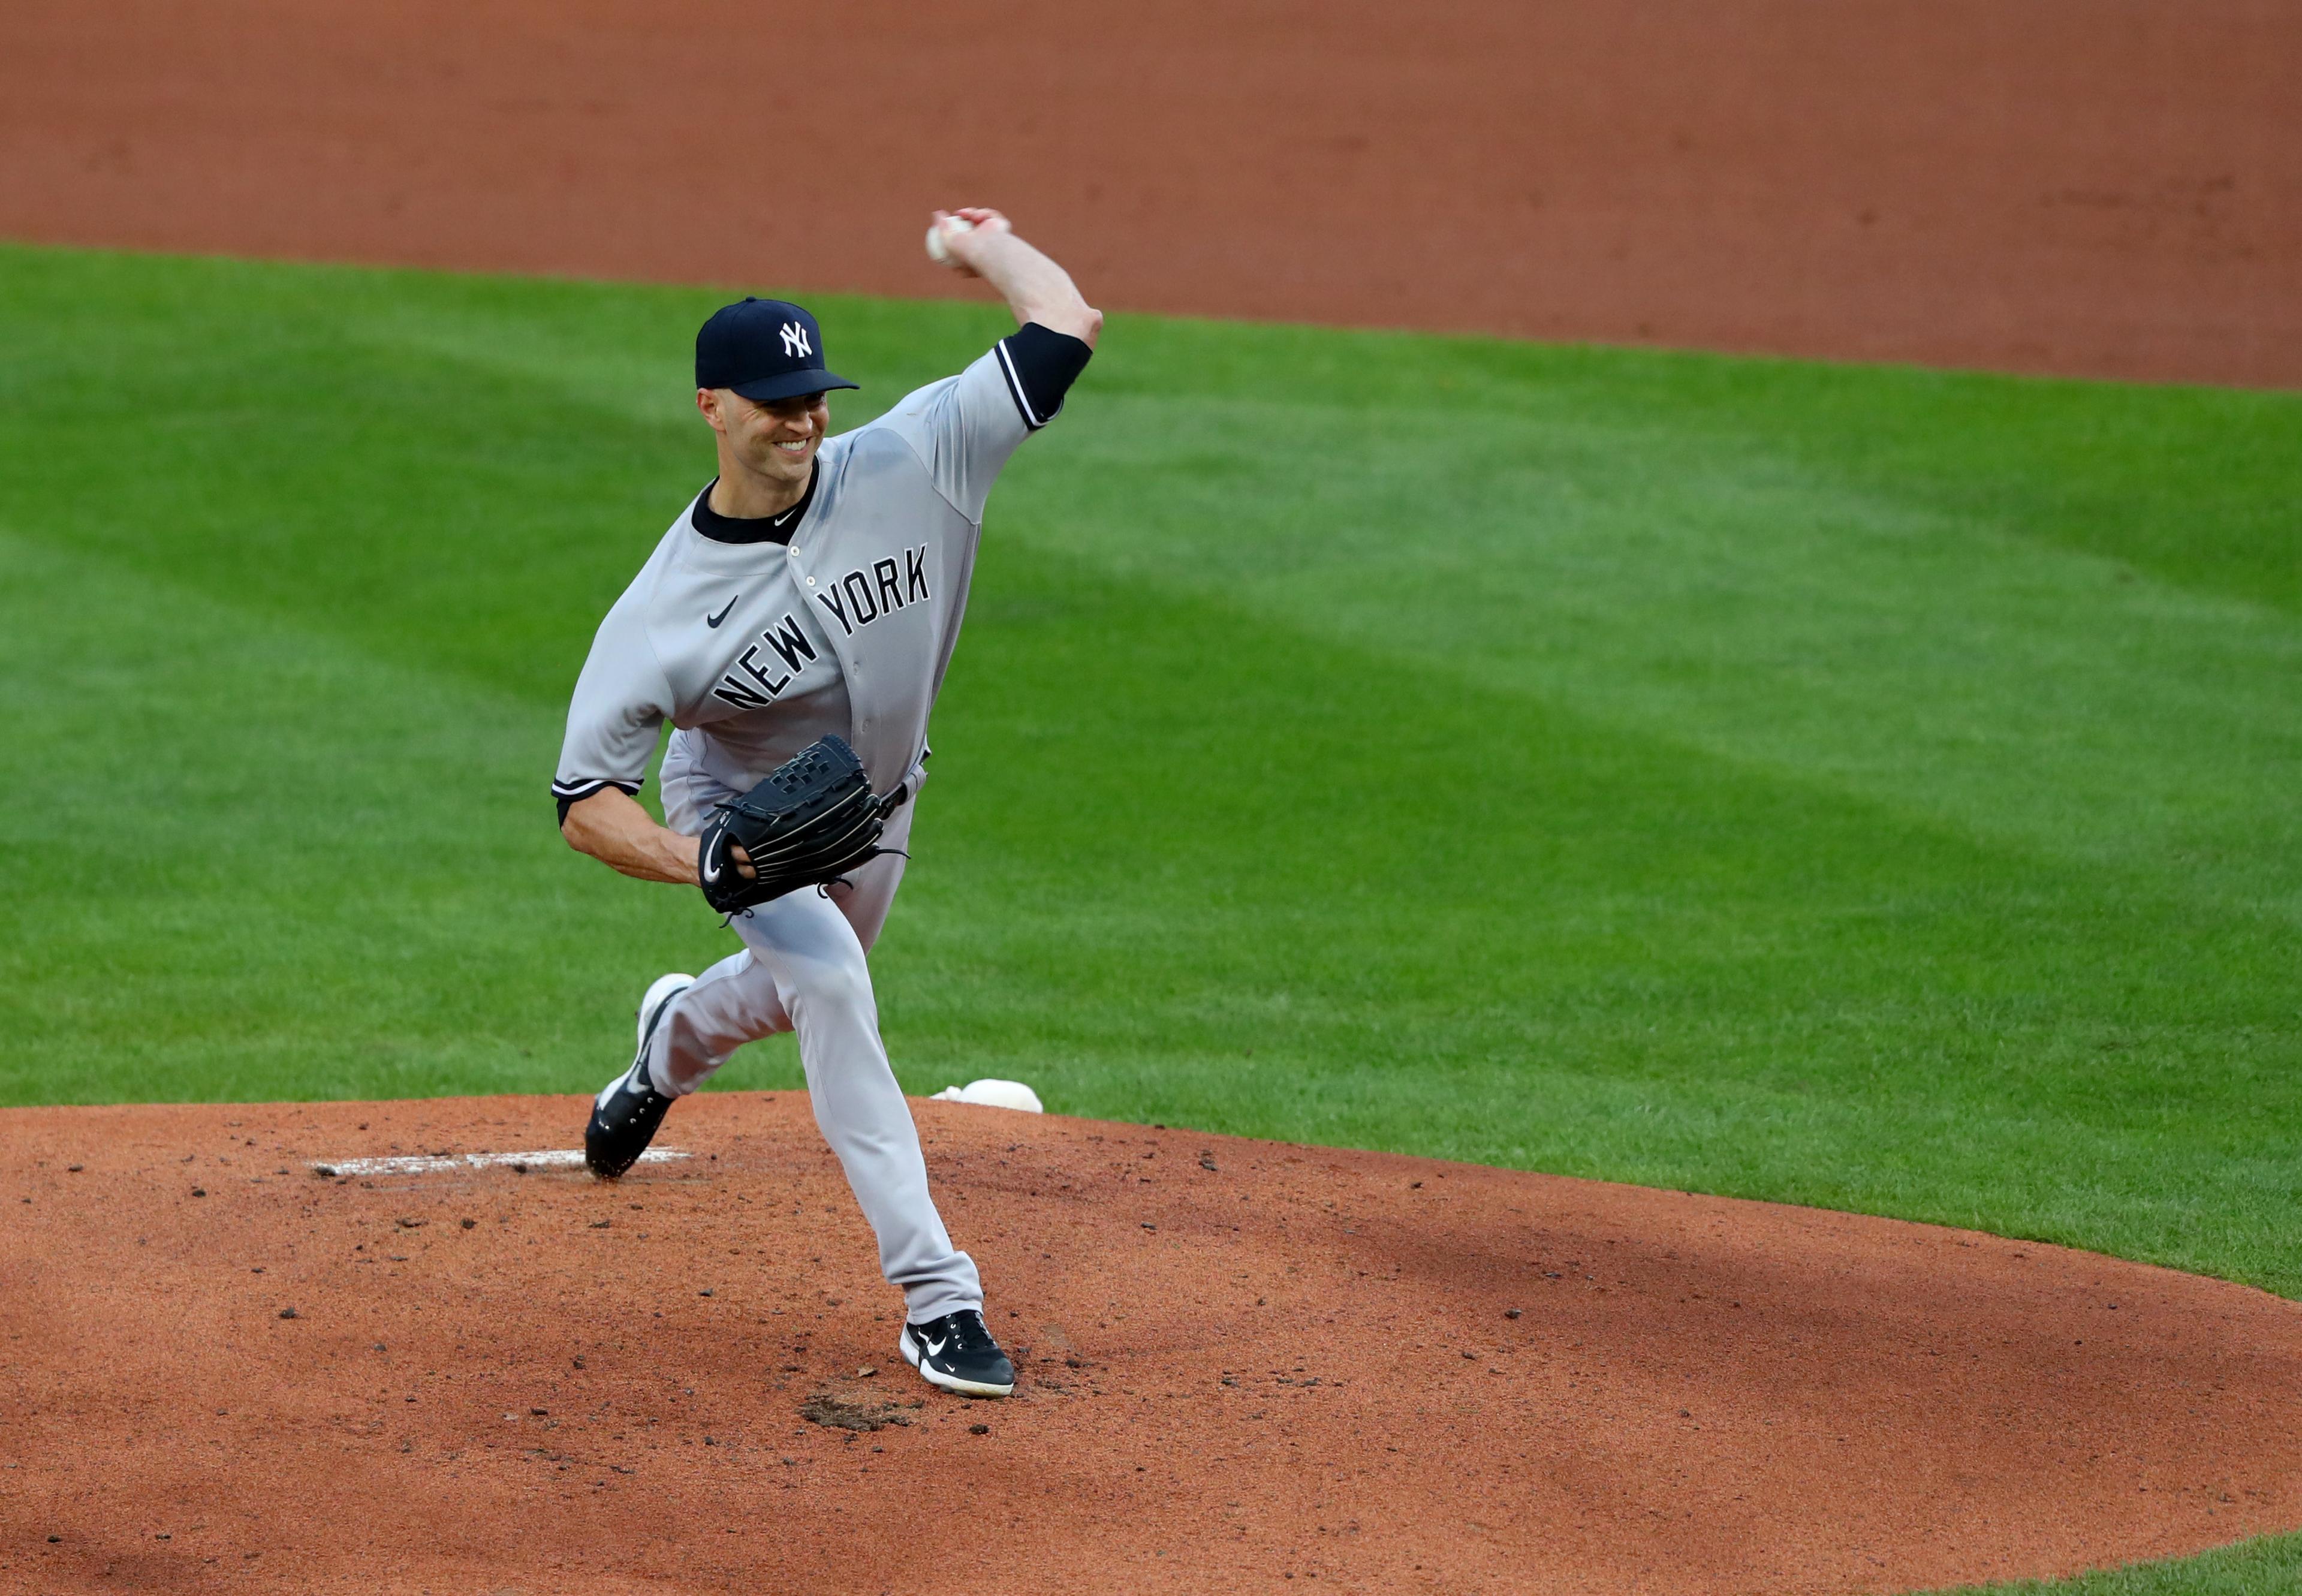 Sep 8, 2020; Buffalo, New York, USA; New York Yankees starting pitcher J.A. Happ (33) throws a pitch during the first inning against the Toronto Blue Jays at Sahlen Field. Mandatory Credit: Timothy T. Ludwig-USA TODAY Sports / © Timothy T. Ludwig-USA TODAY Sports